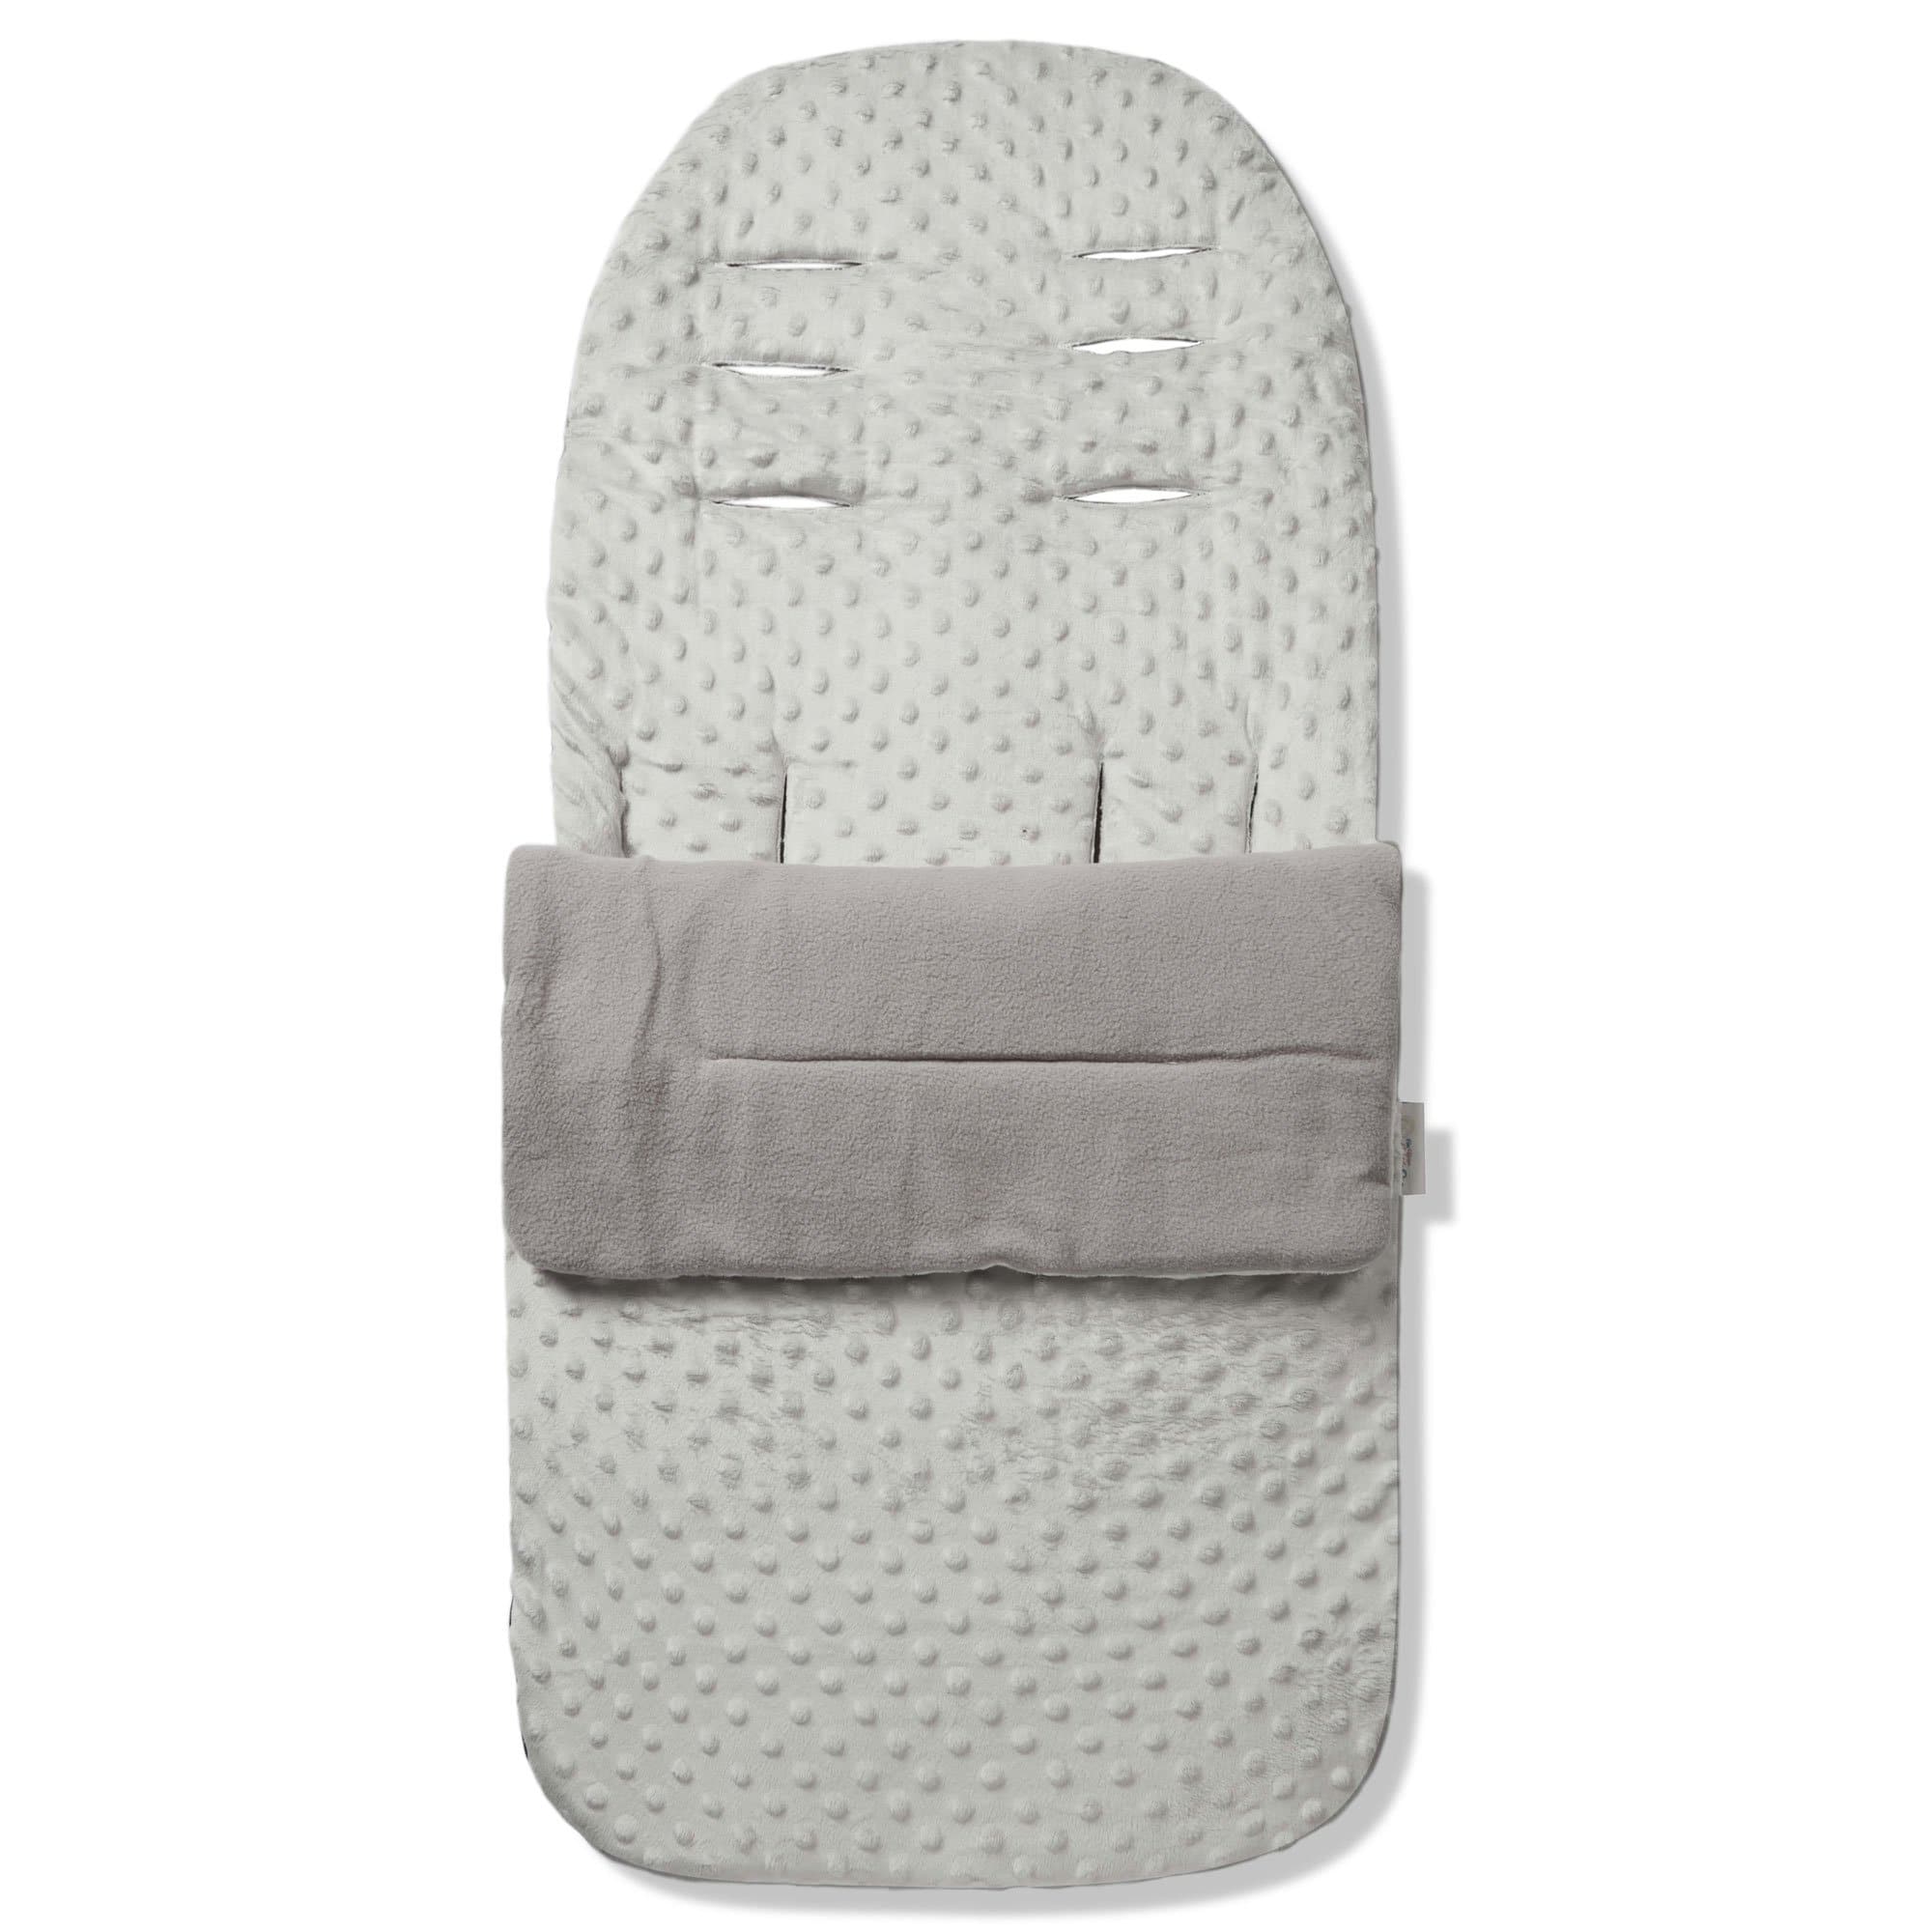 Dimple Footmuff / Cosy Toes Compatible with Maclaren - Grey / Fits All Models | For Your Little One